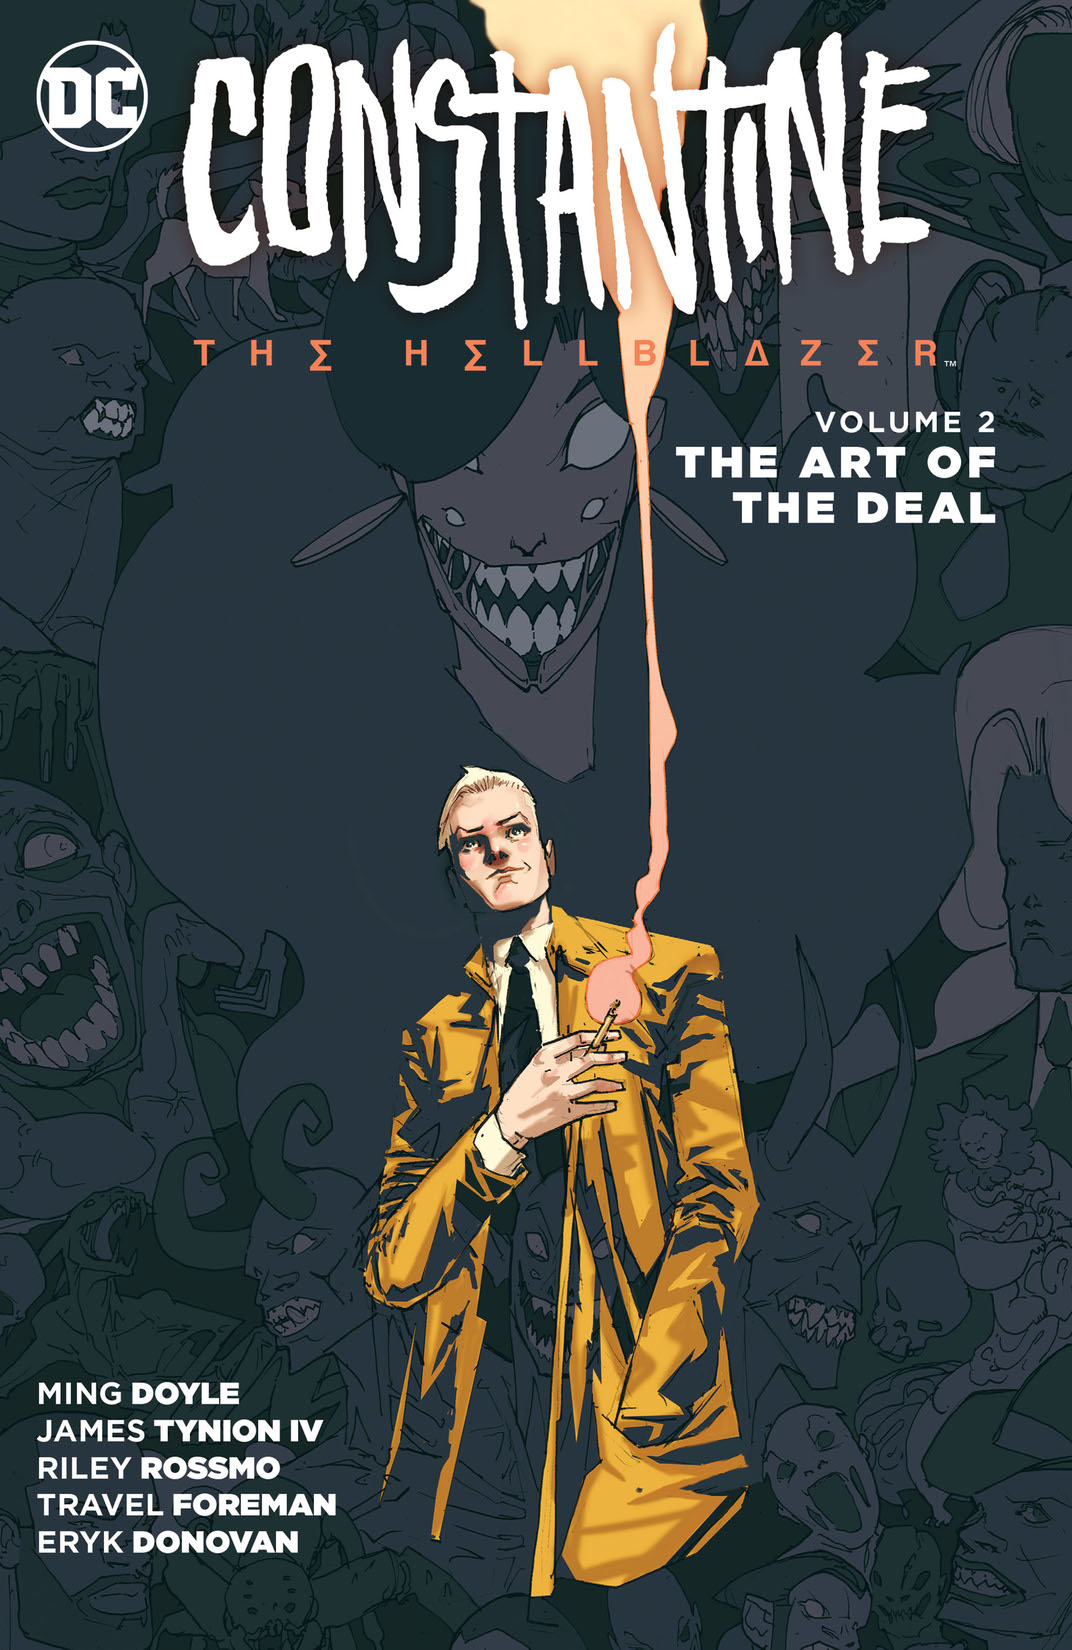 Constantine: The Hellblazer Vol. 2: The Art of the Deal preview images